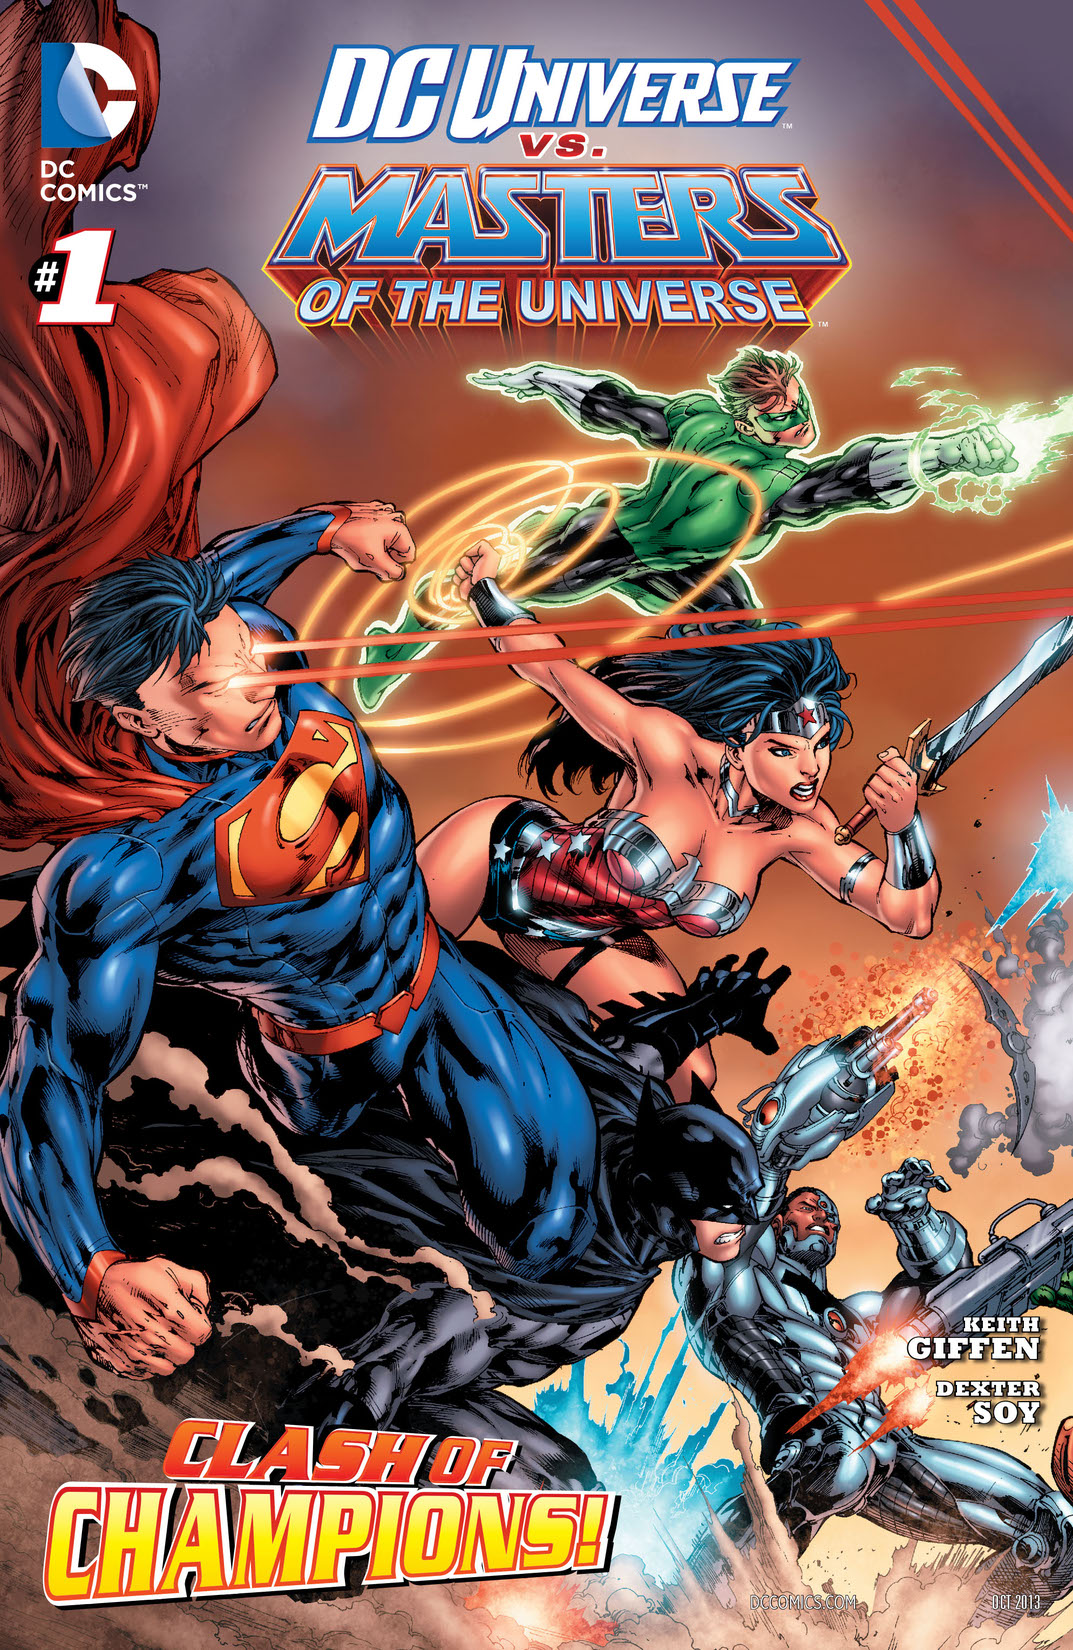 DC Universe vs. Masters of the Universe #1 preview images